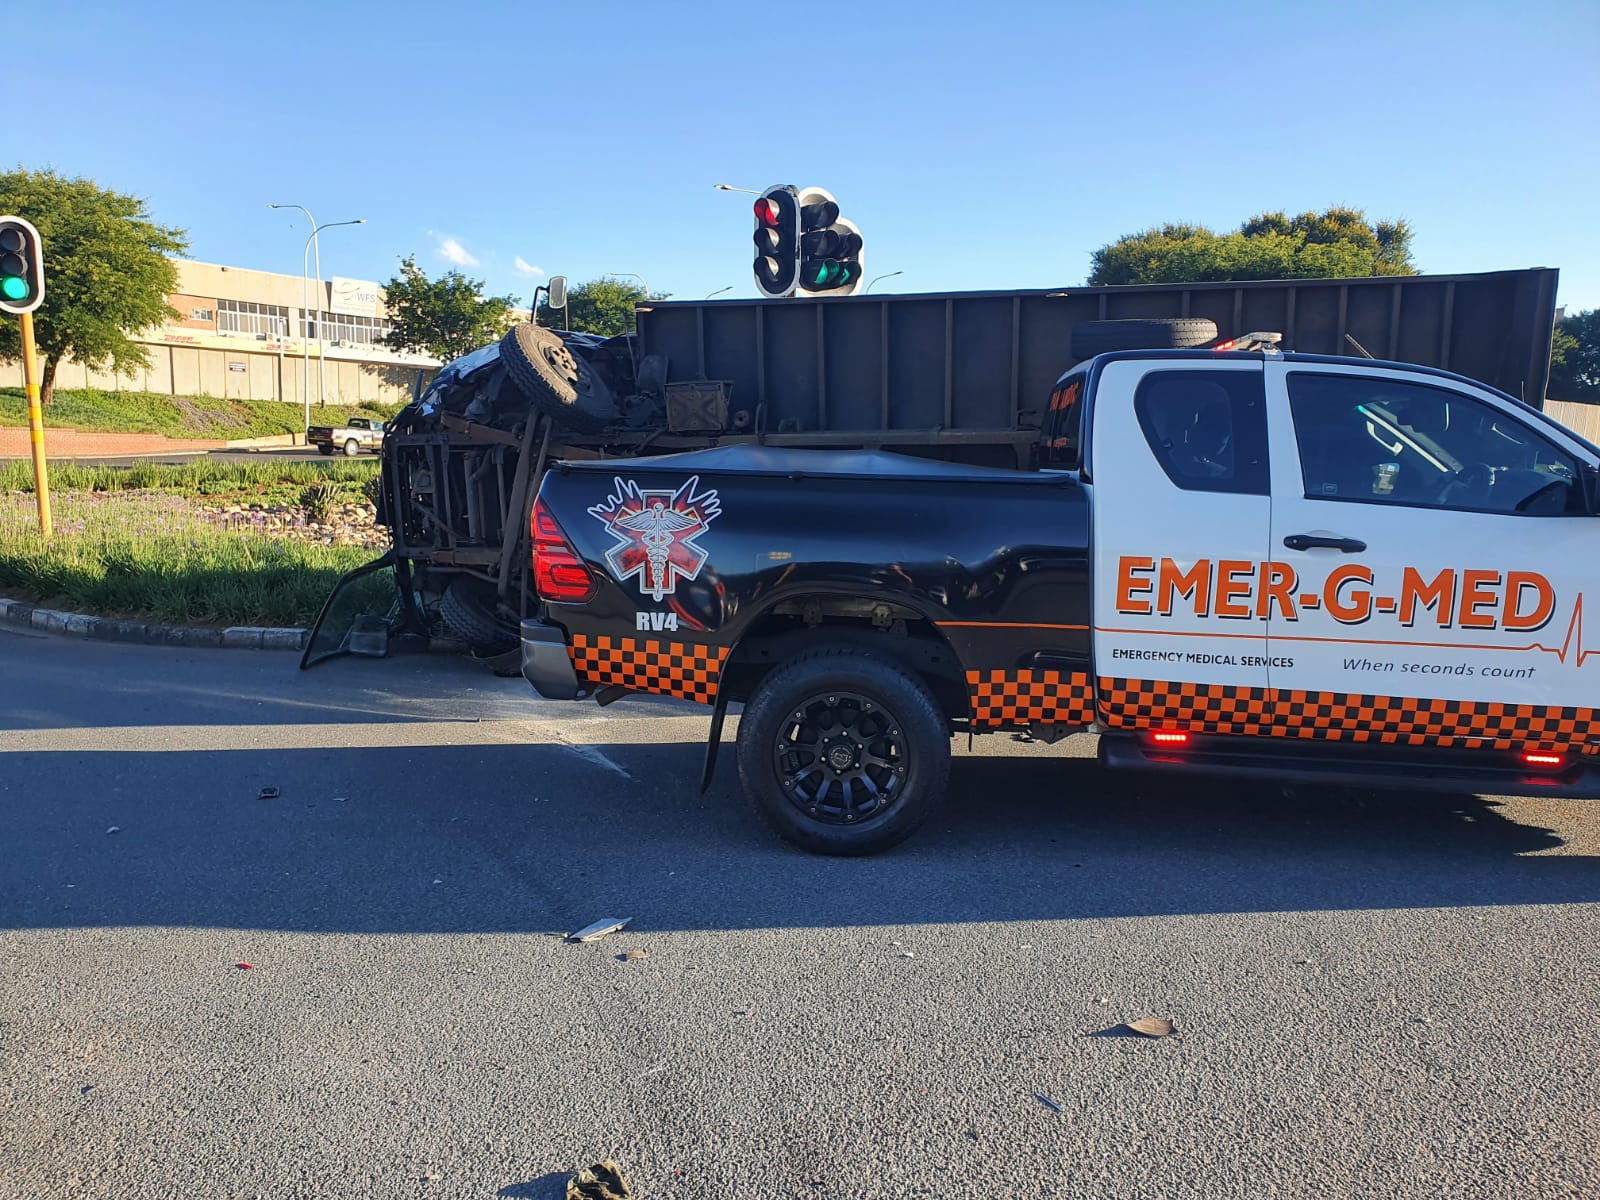 Two injured in a truck rollover in Kempton Park